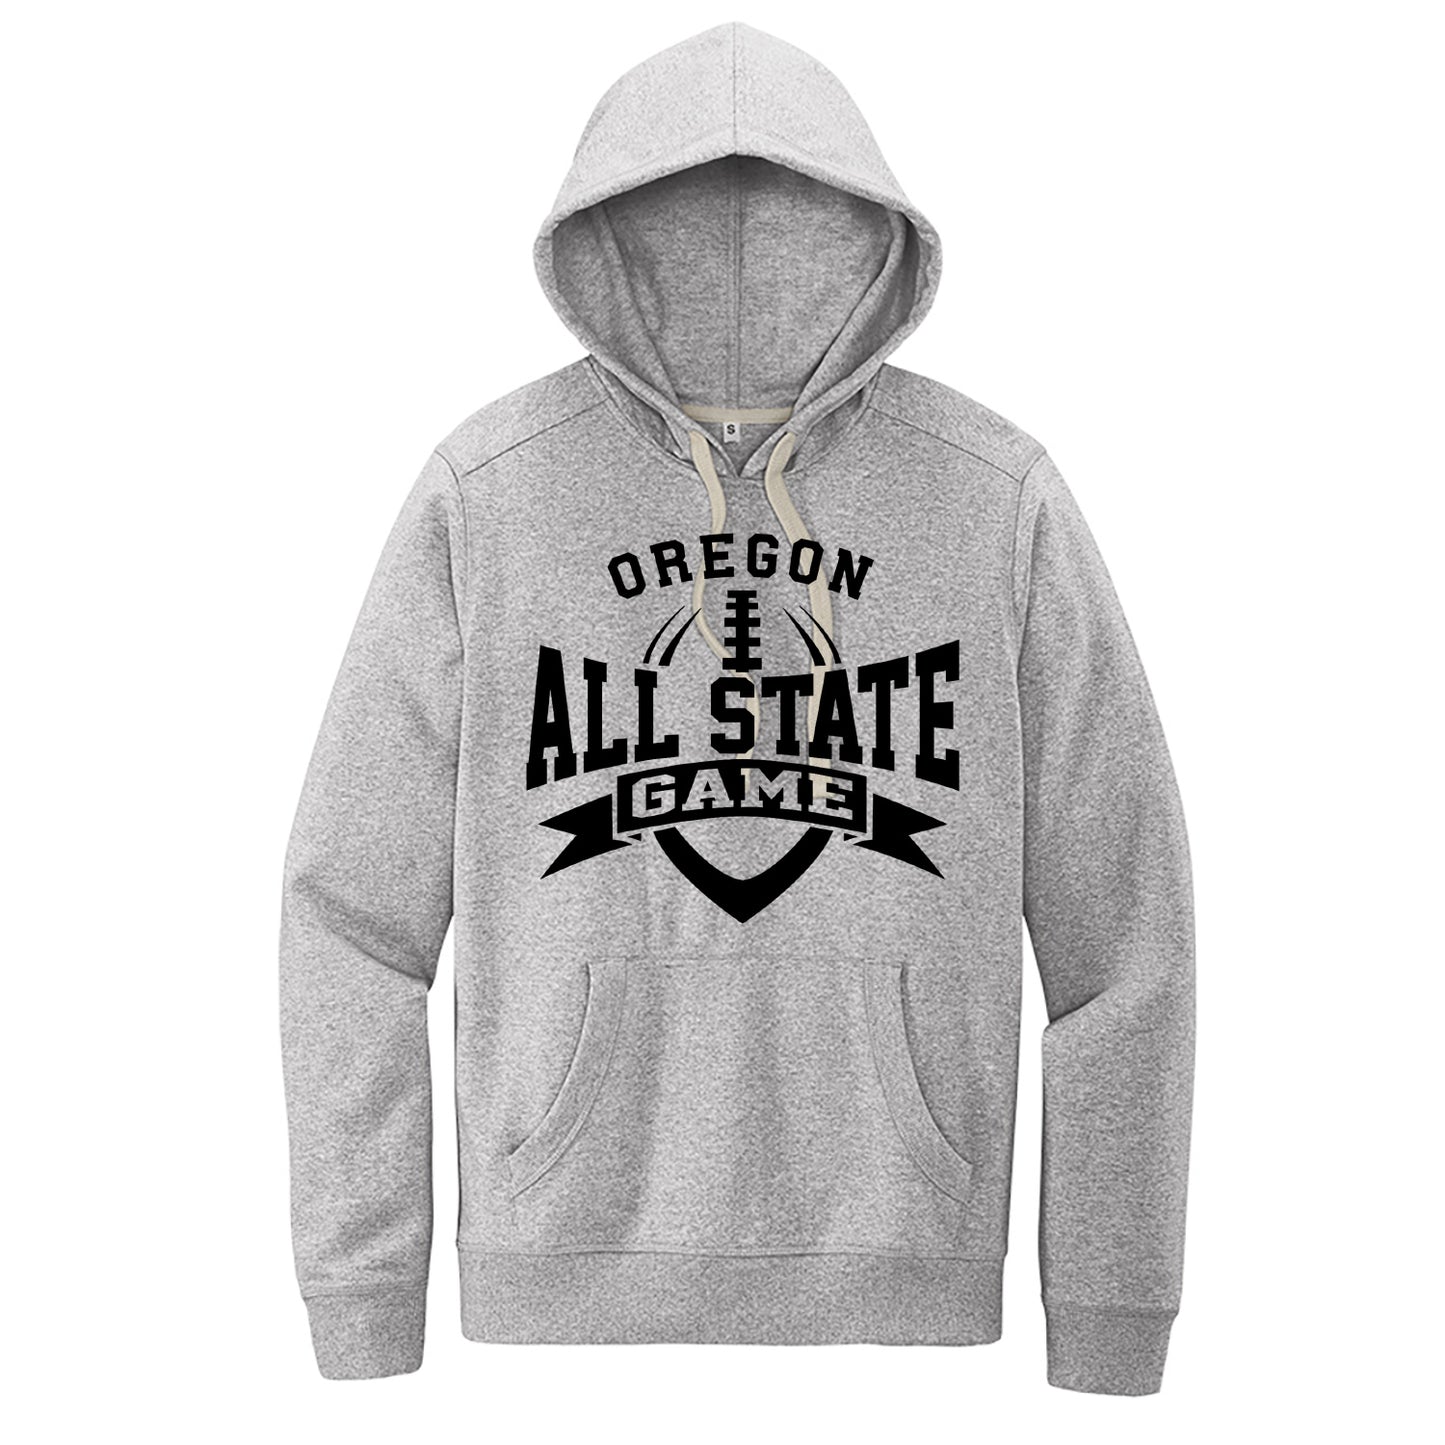 Oregon All State - YOUTH Fleece Hoodie - 2 colors available